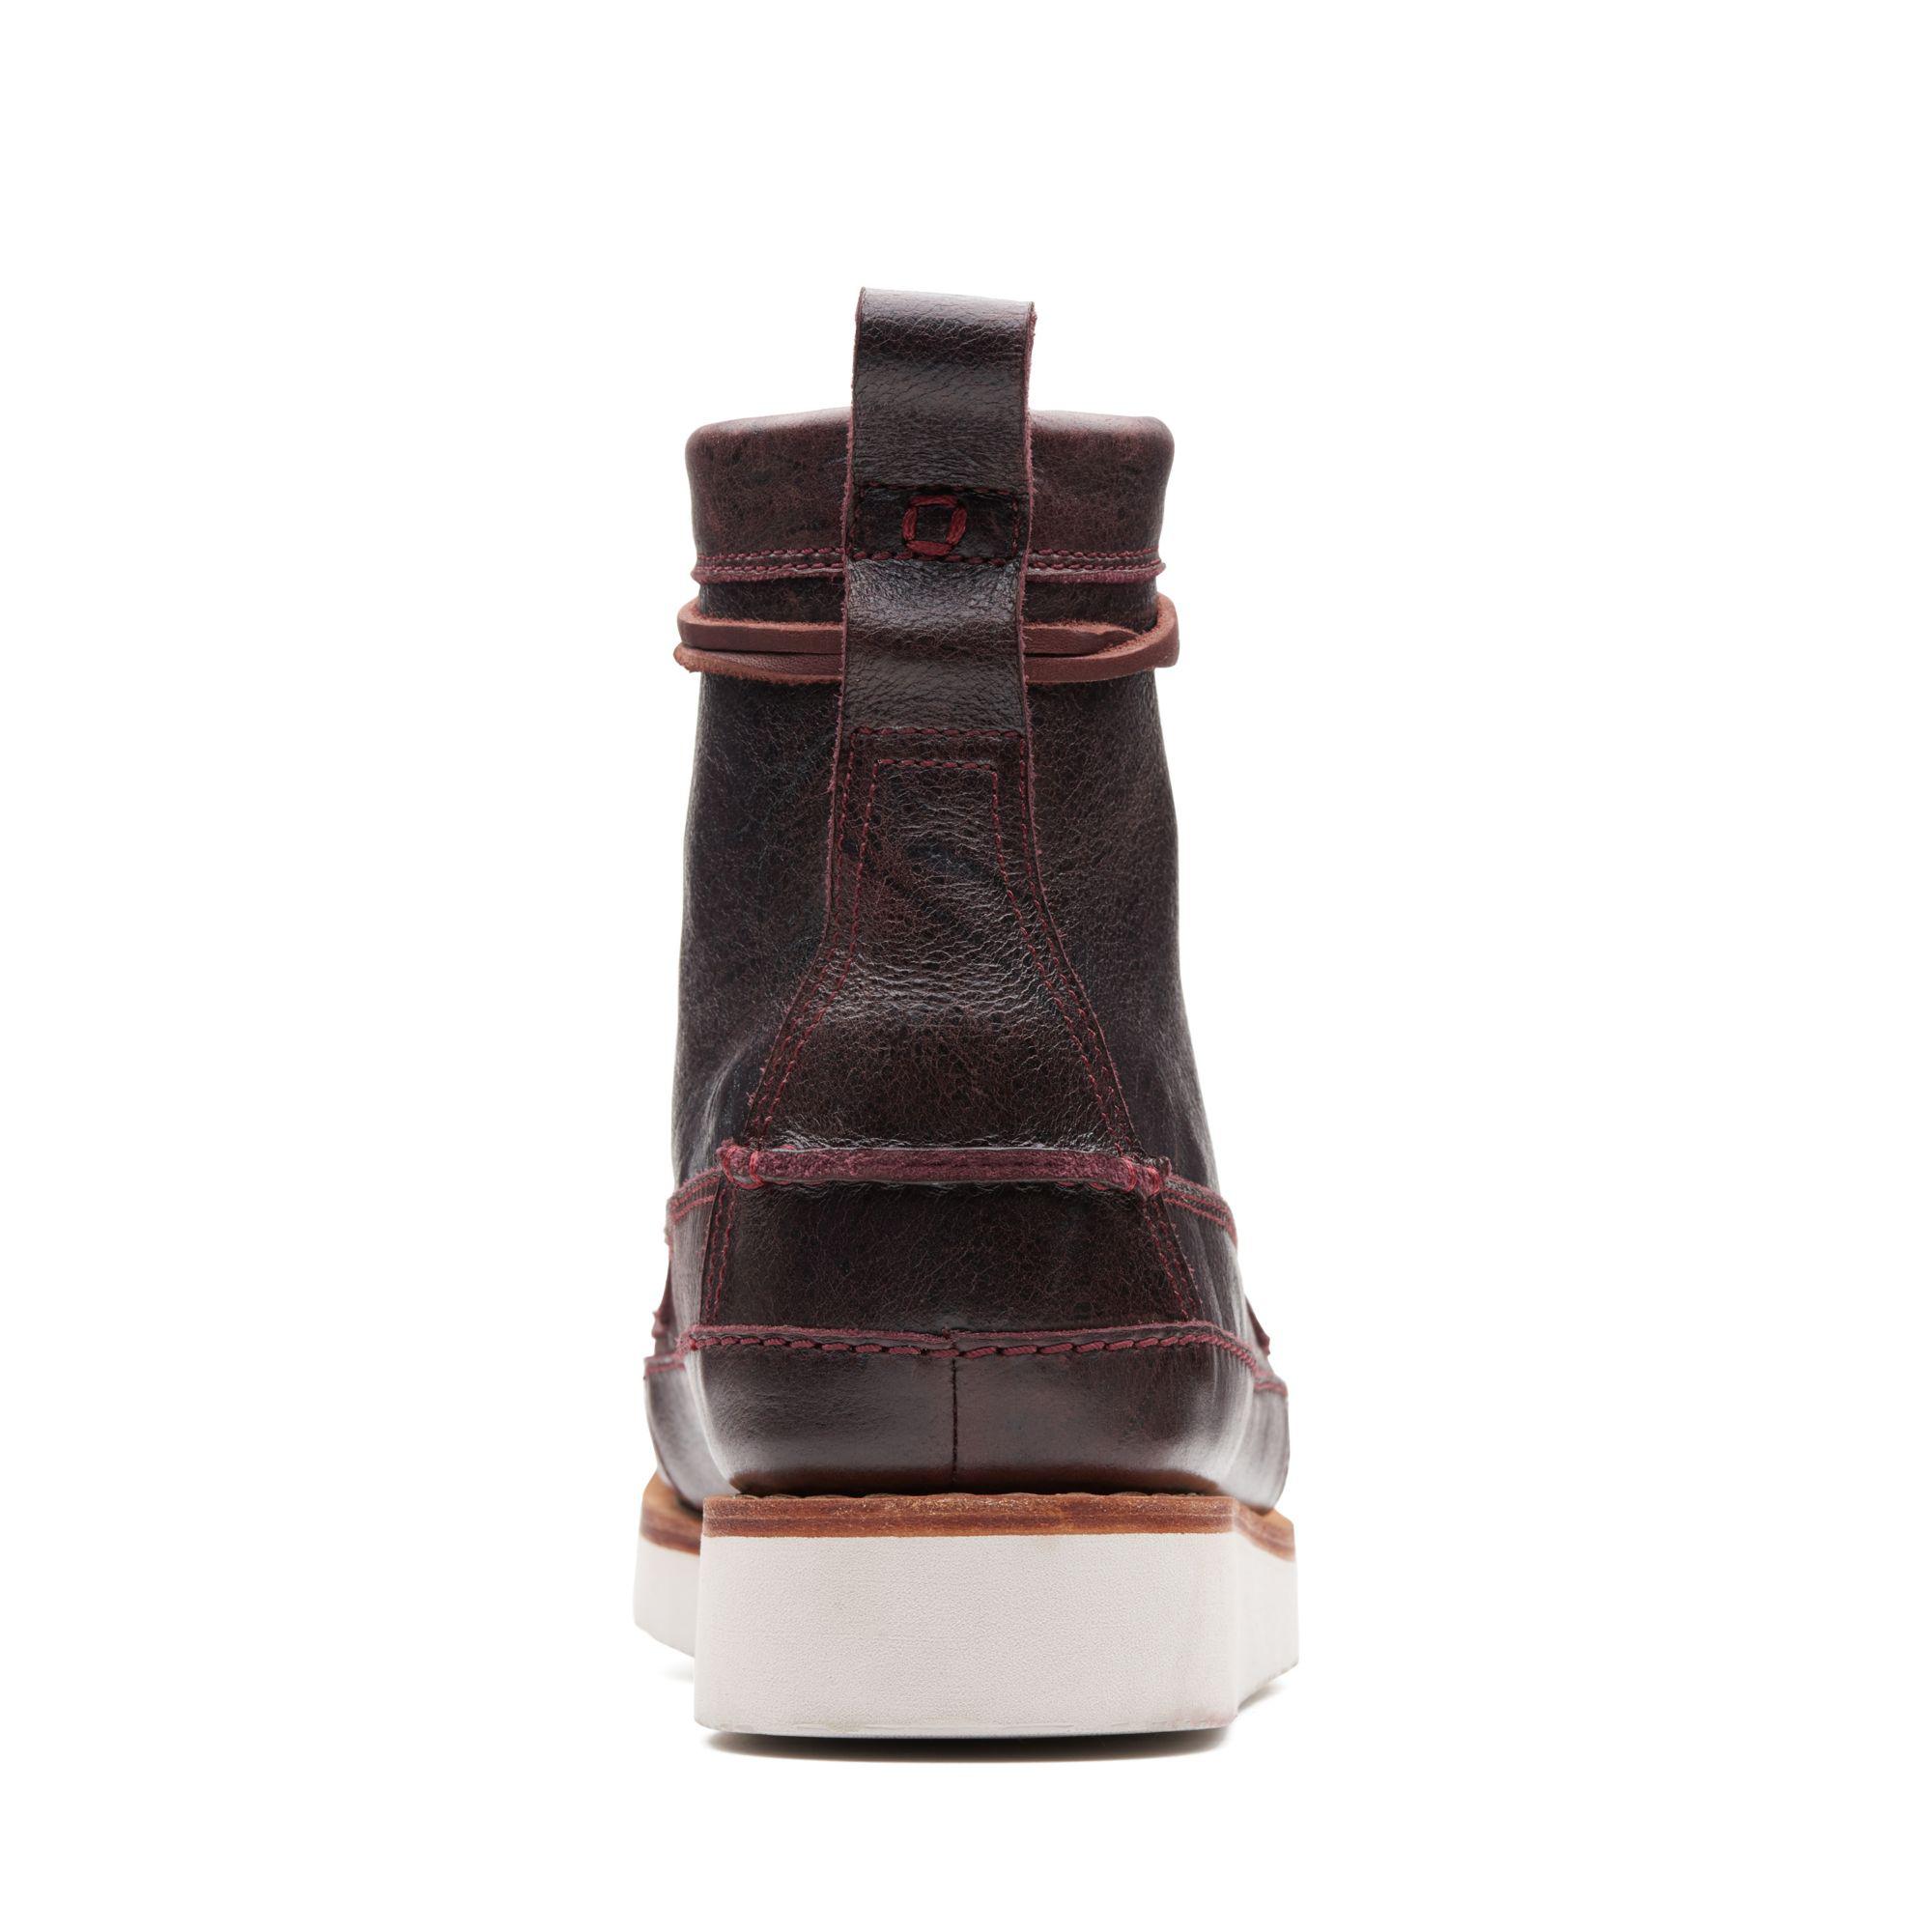 Clarks Wallace Hike in Bordeaux Leather (Brown) for Men - Lyst